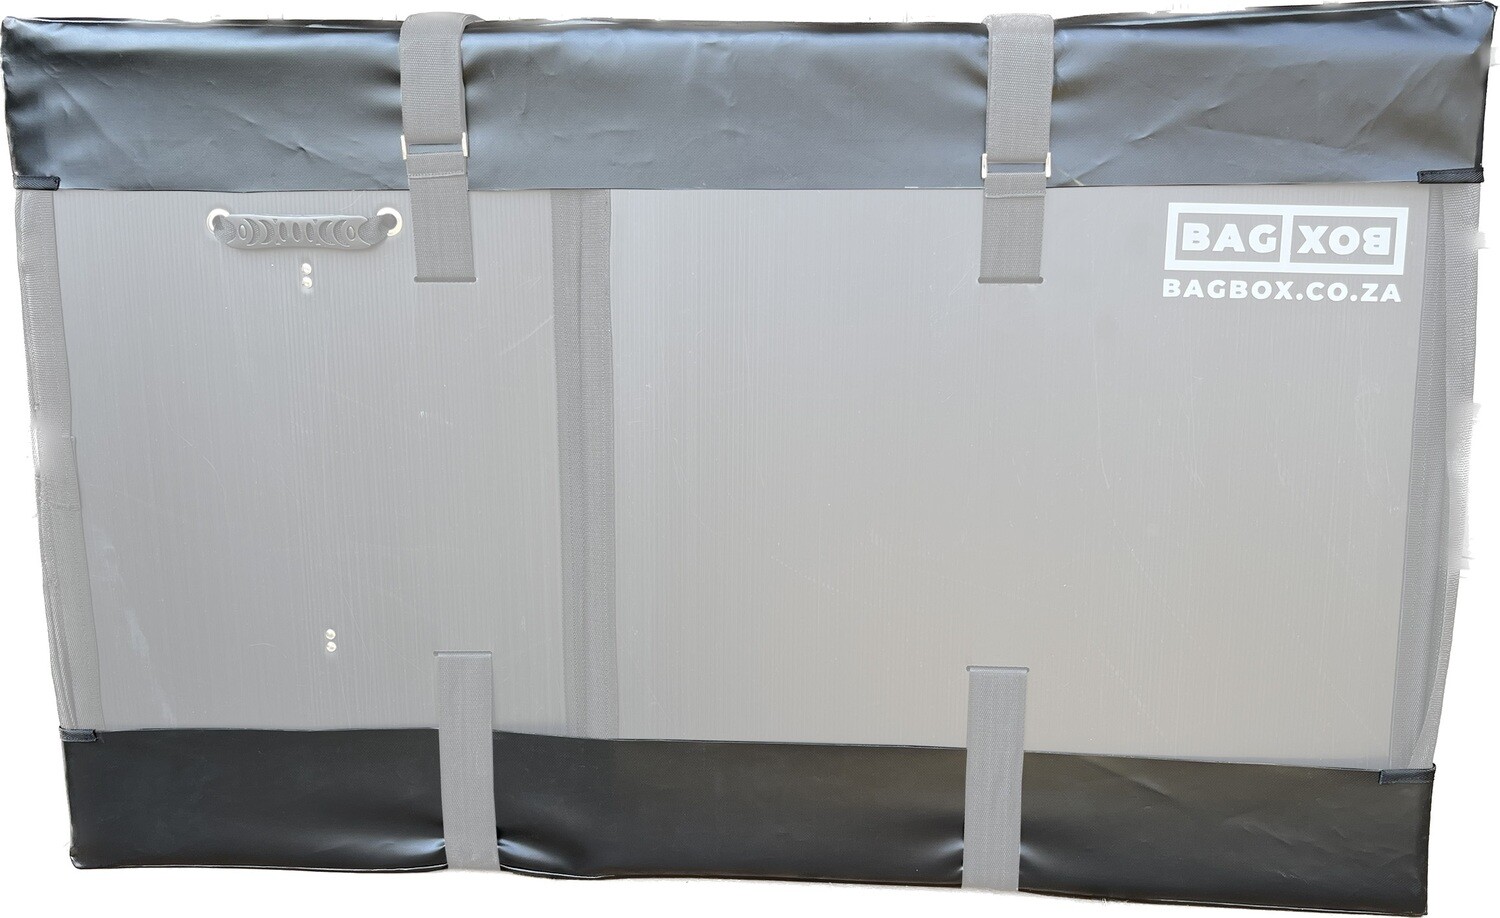 Protective covers for Bike Travel Box (Top & Bottom)